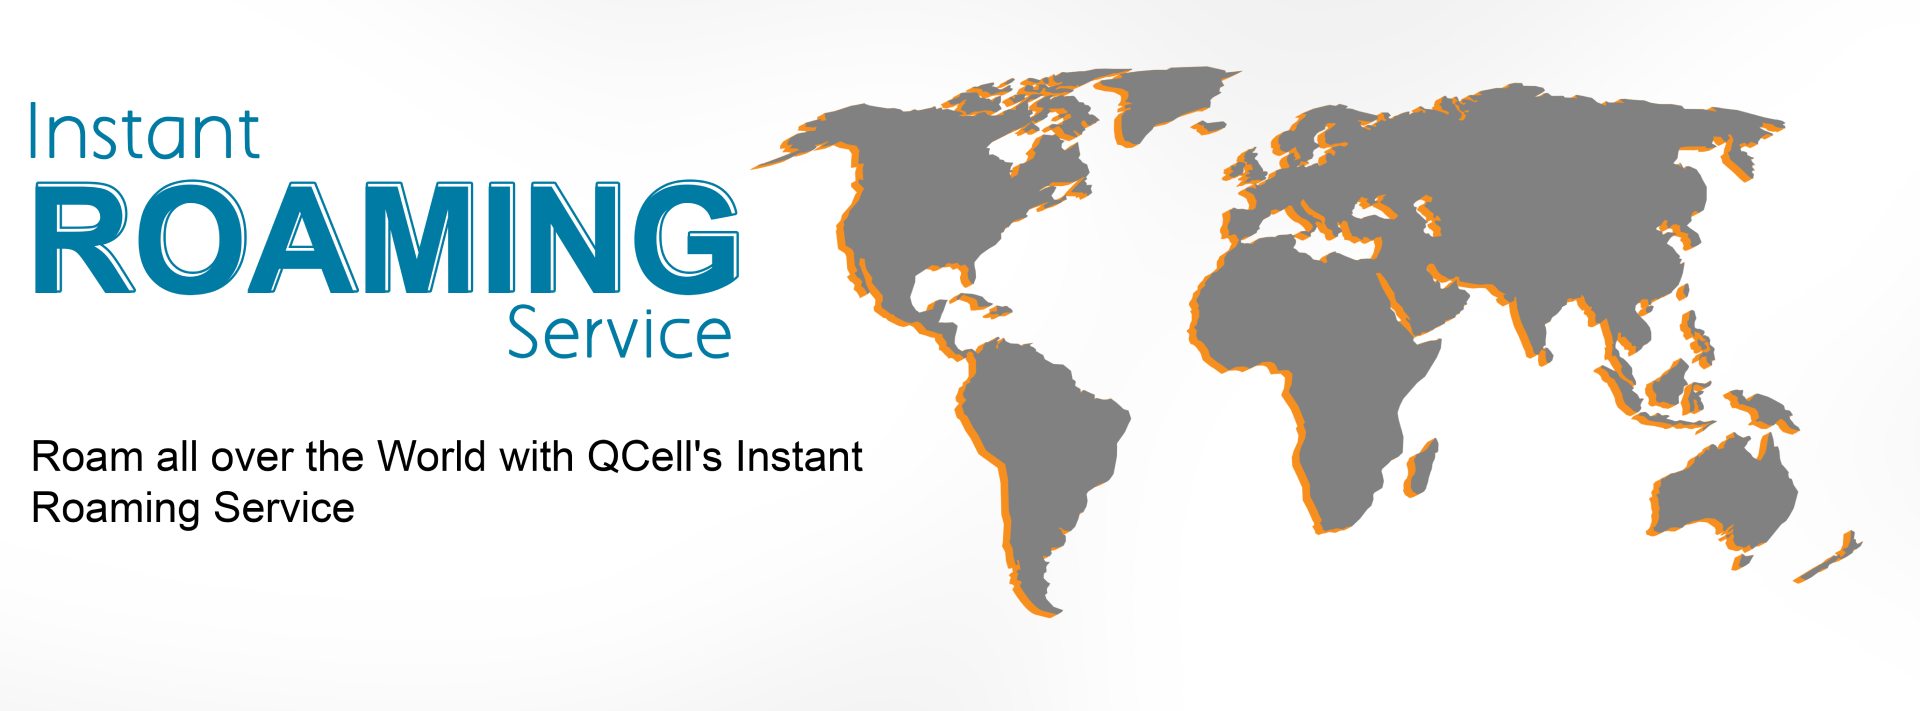 List of countries roaming with qcell